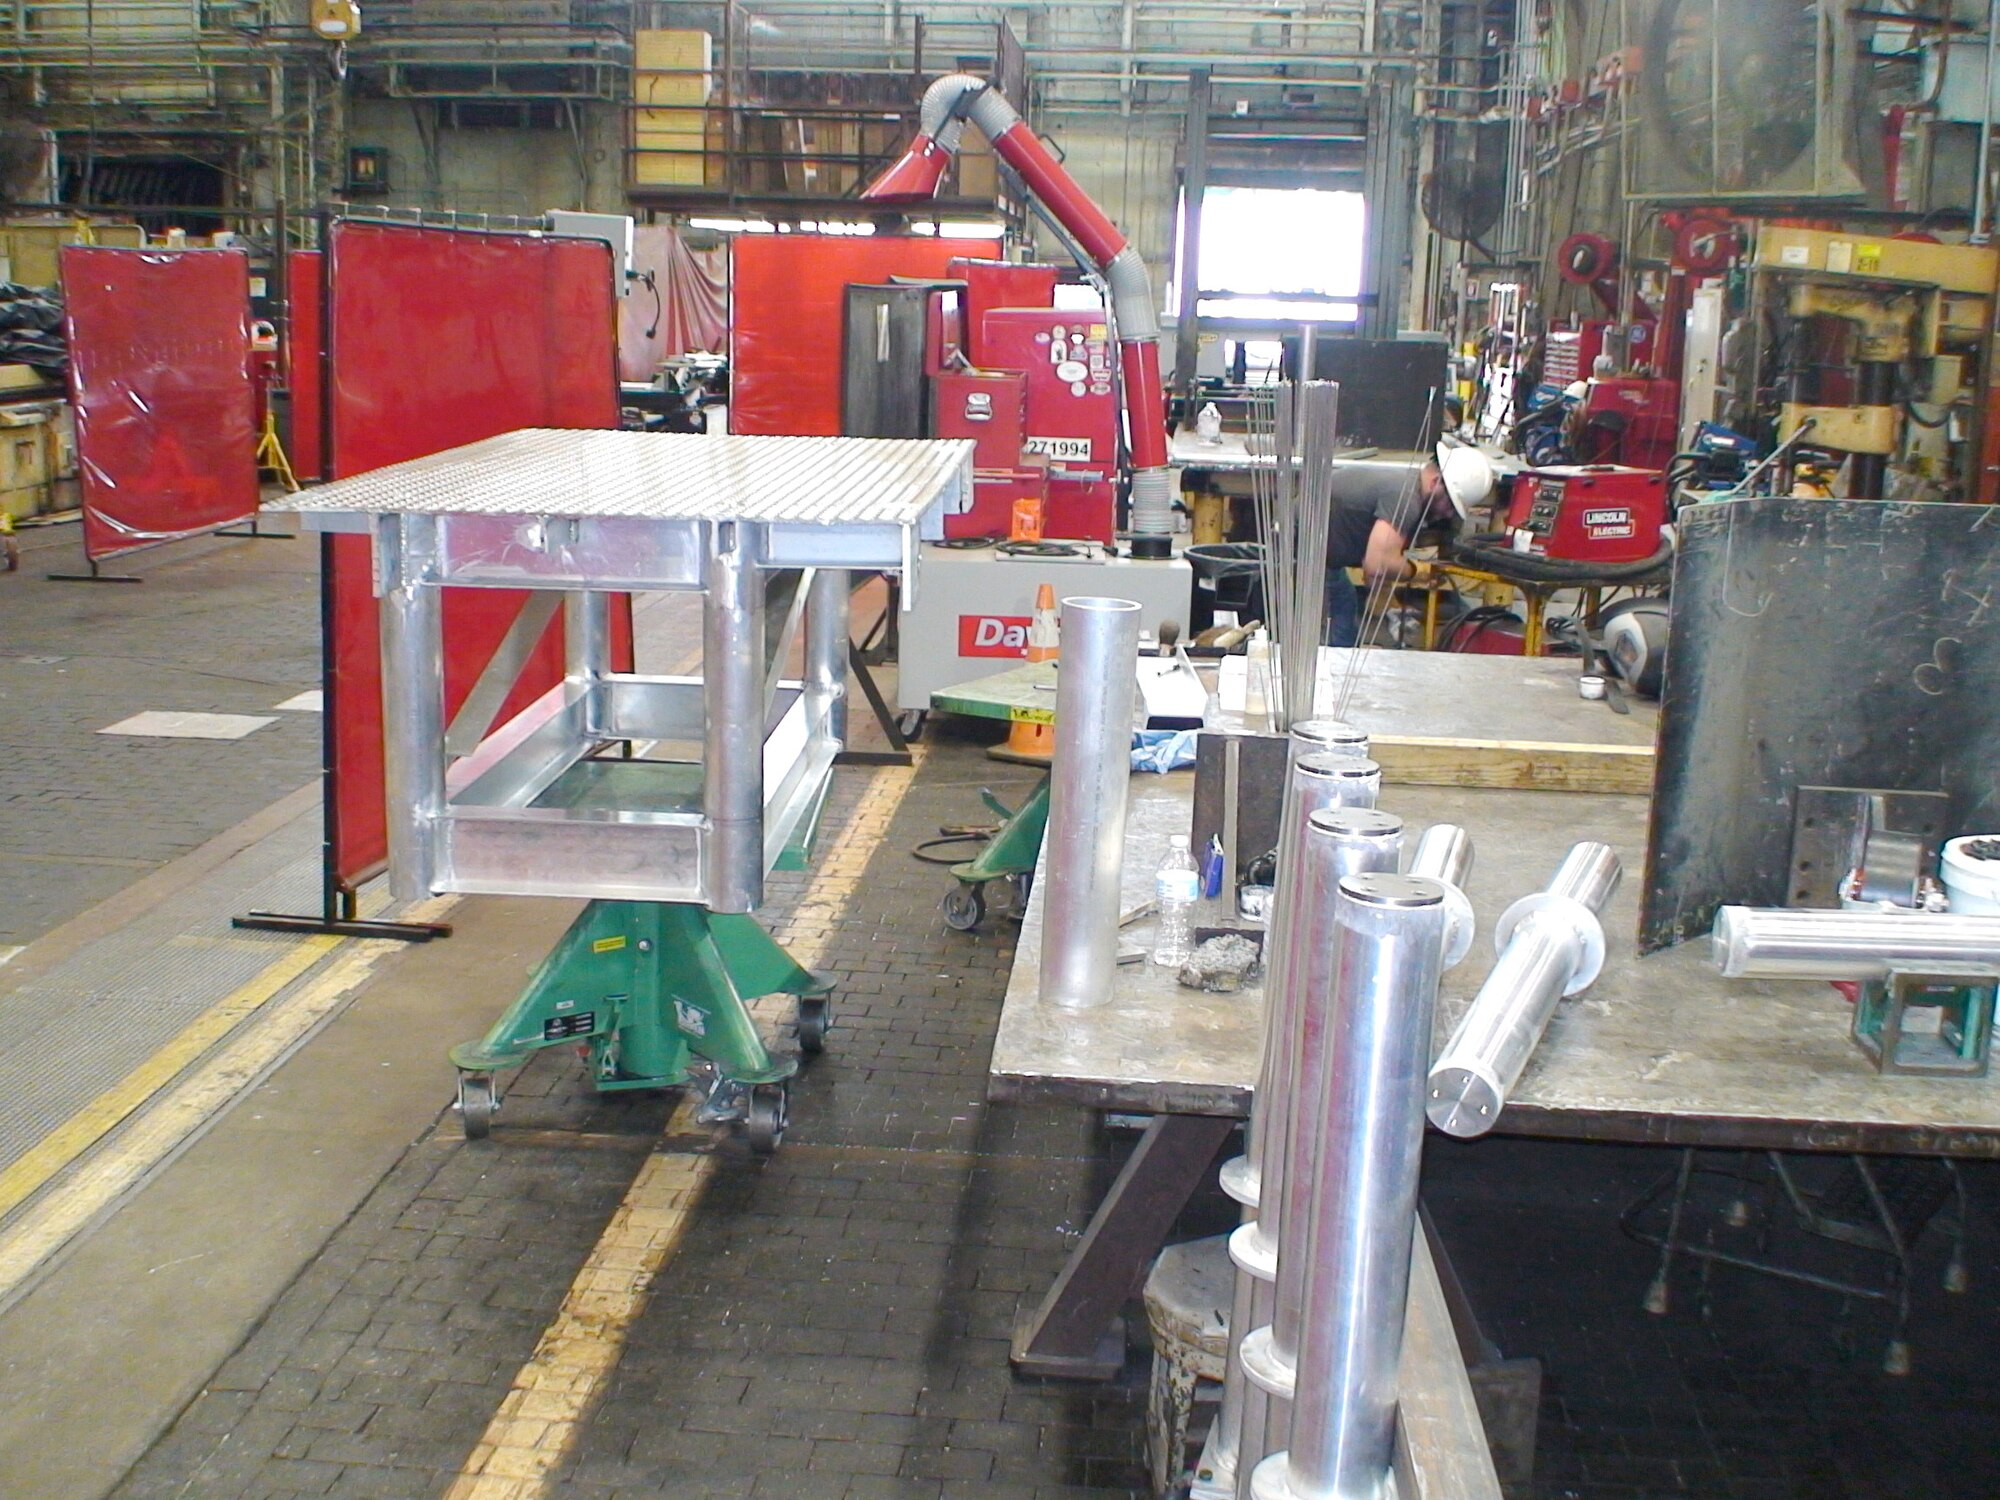 An aluminum platform system, shown here June 22, 2020, prior to having legs installed, is welded by ironworkers with the Arnold Engineering Development Complex (AEDC) Model and Machine Shop as part of a request for the C-2 Engine Test Cell at Arnold Air Force Base, Tenn. (U.S. Air Force photo)